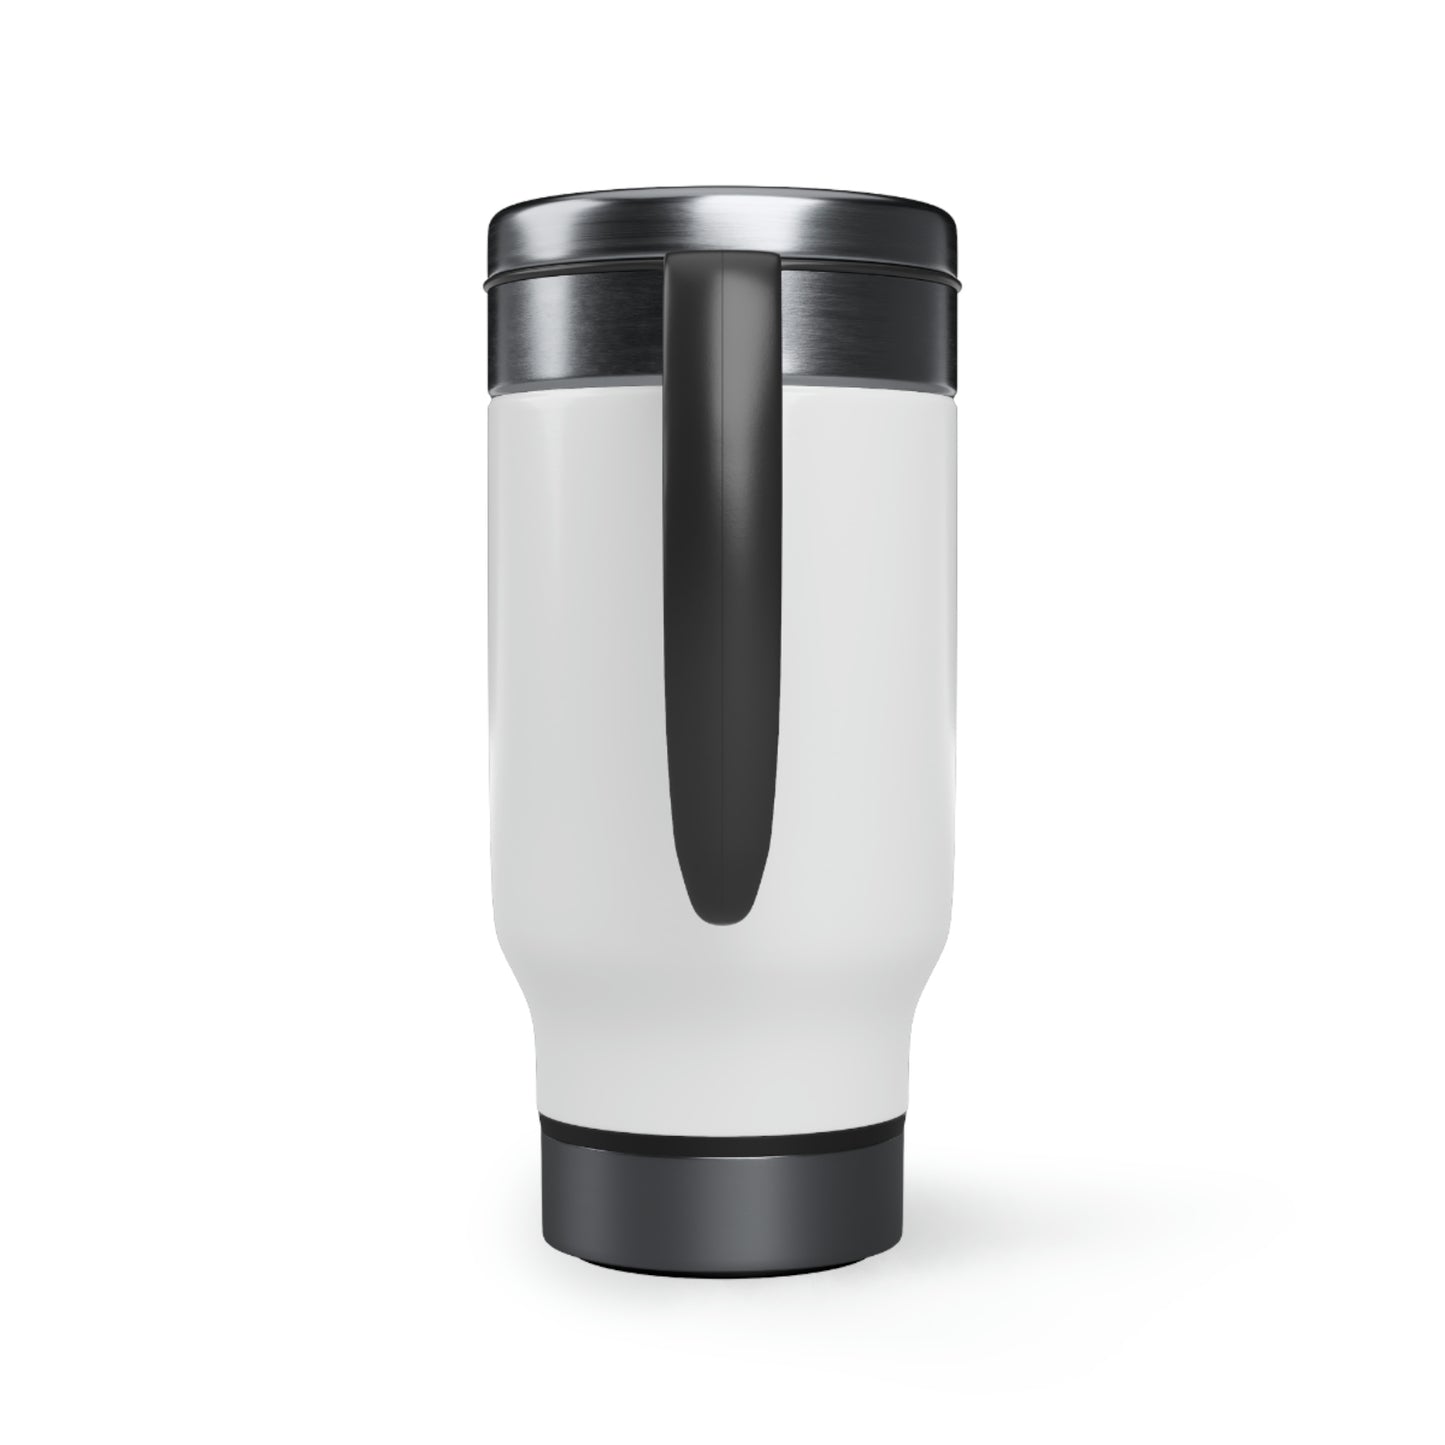 Stags Logo 4 Stainless Steel Travel Mug with Handle, 14oz  #M10-02C